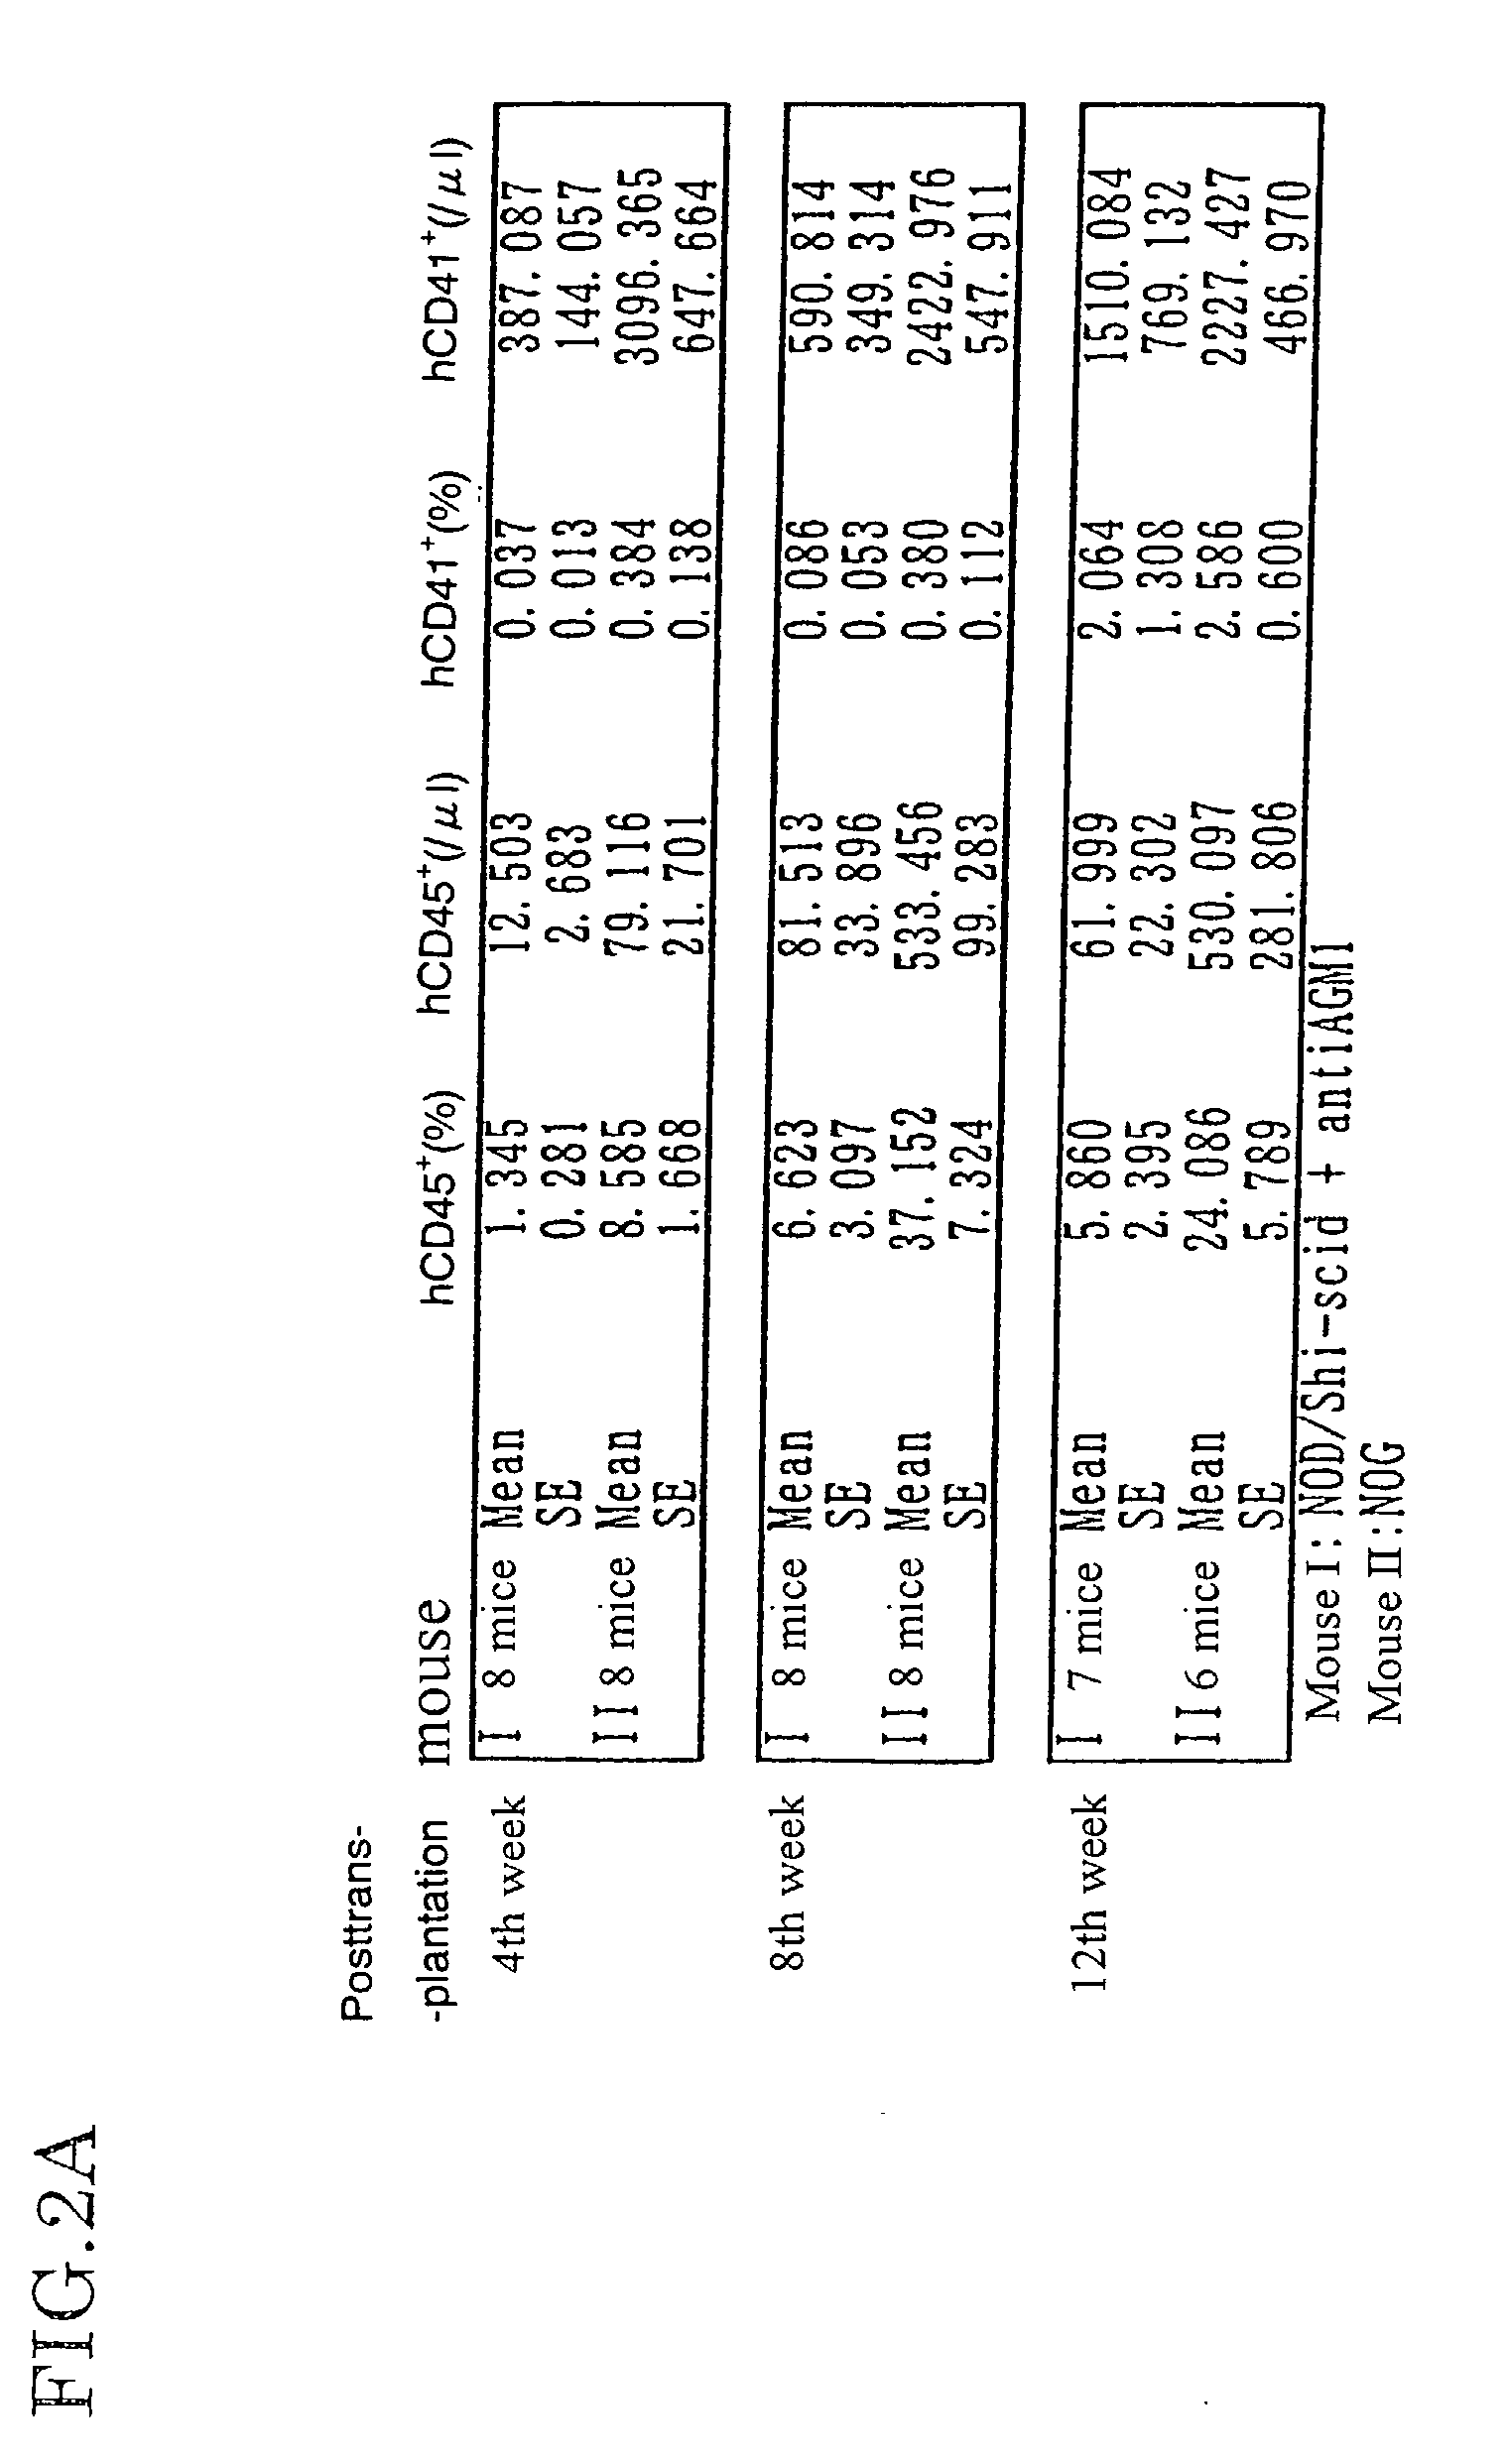 Method of producing a mouse suitable for the engraftment, differentiation and proliferation of heterologous cells, mouse produced by this method and use of the mouse